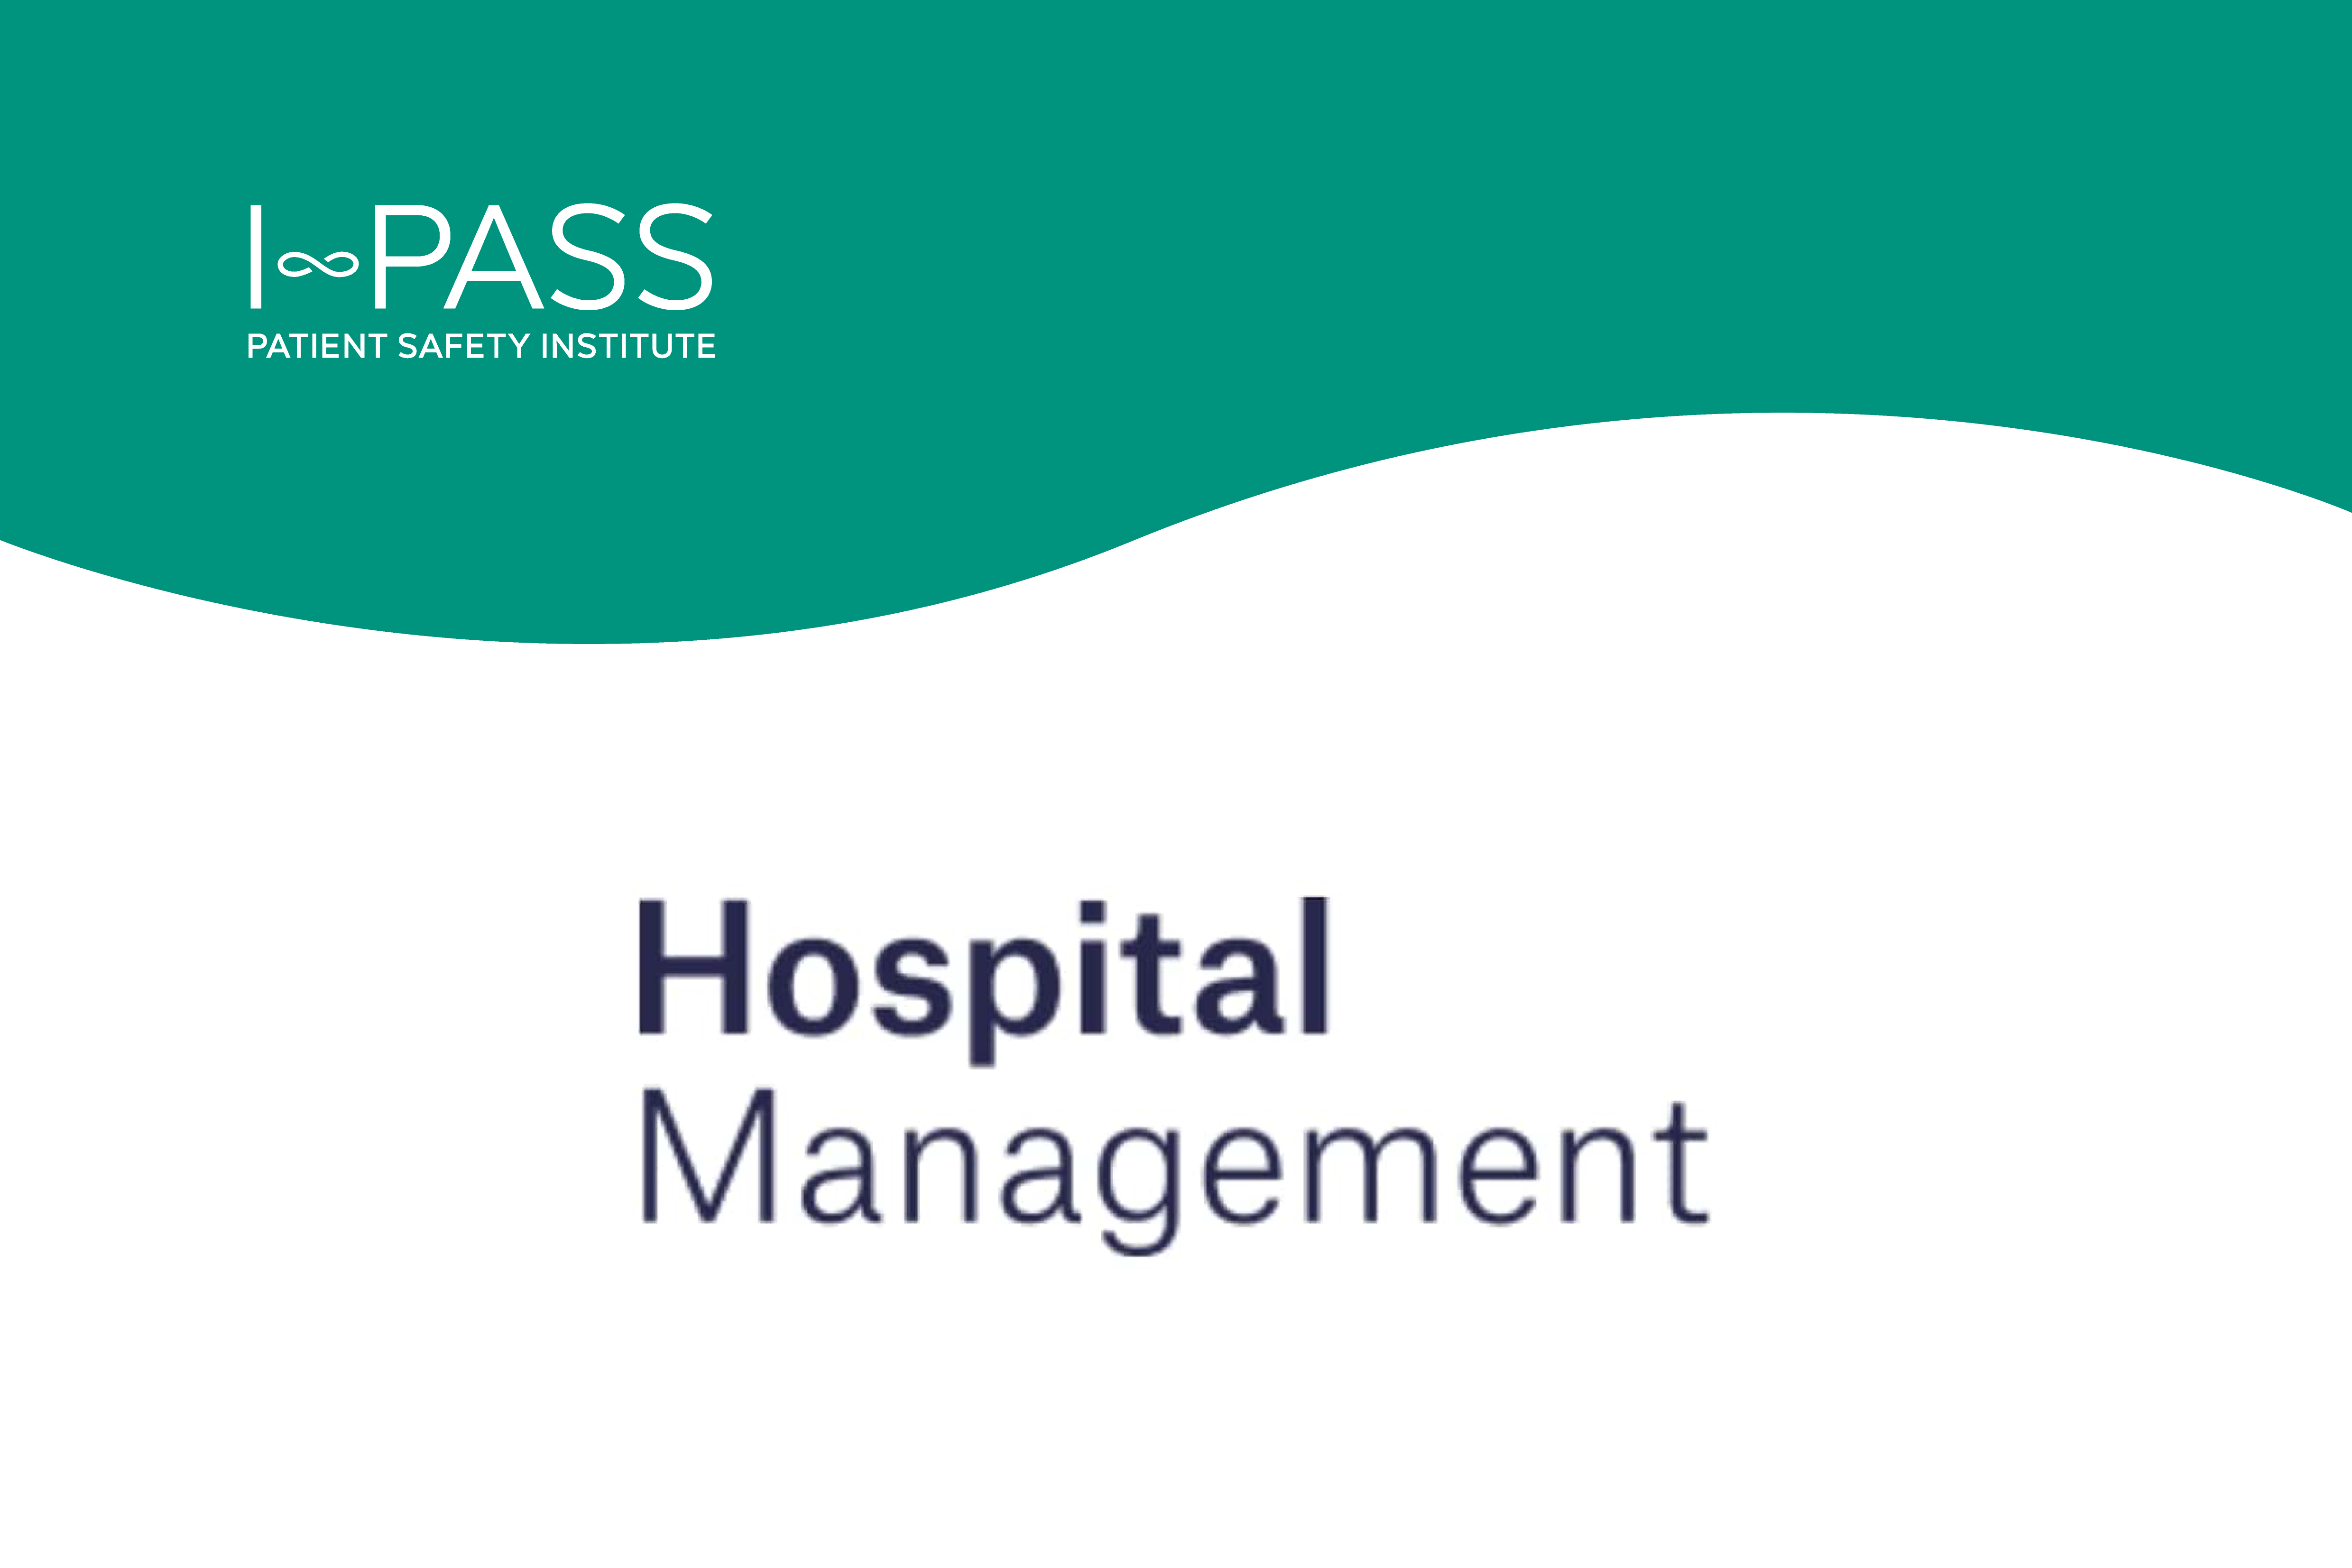 Hospital Management: Kentucky Hospital Association working with I-PASS to reduce errors